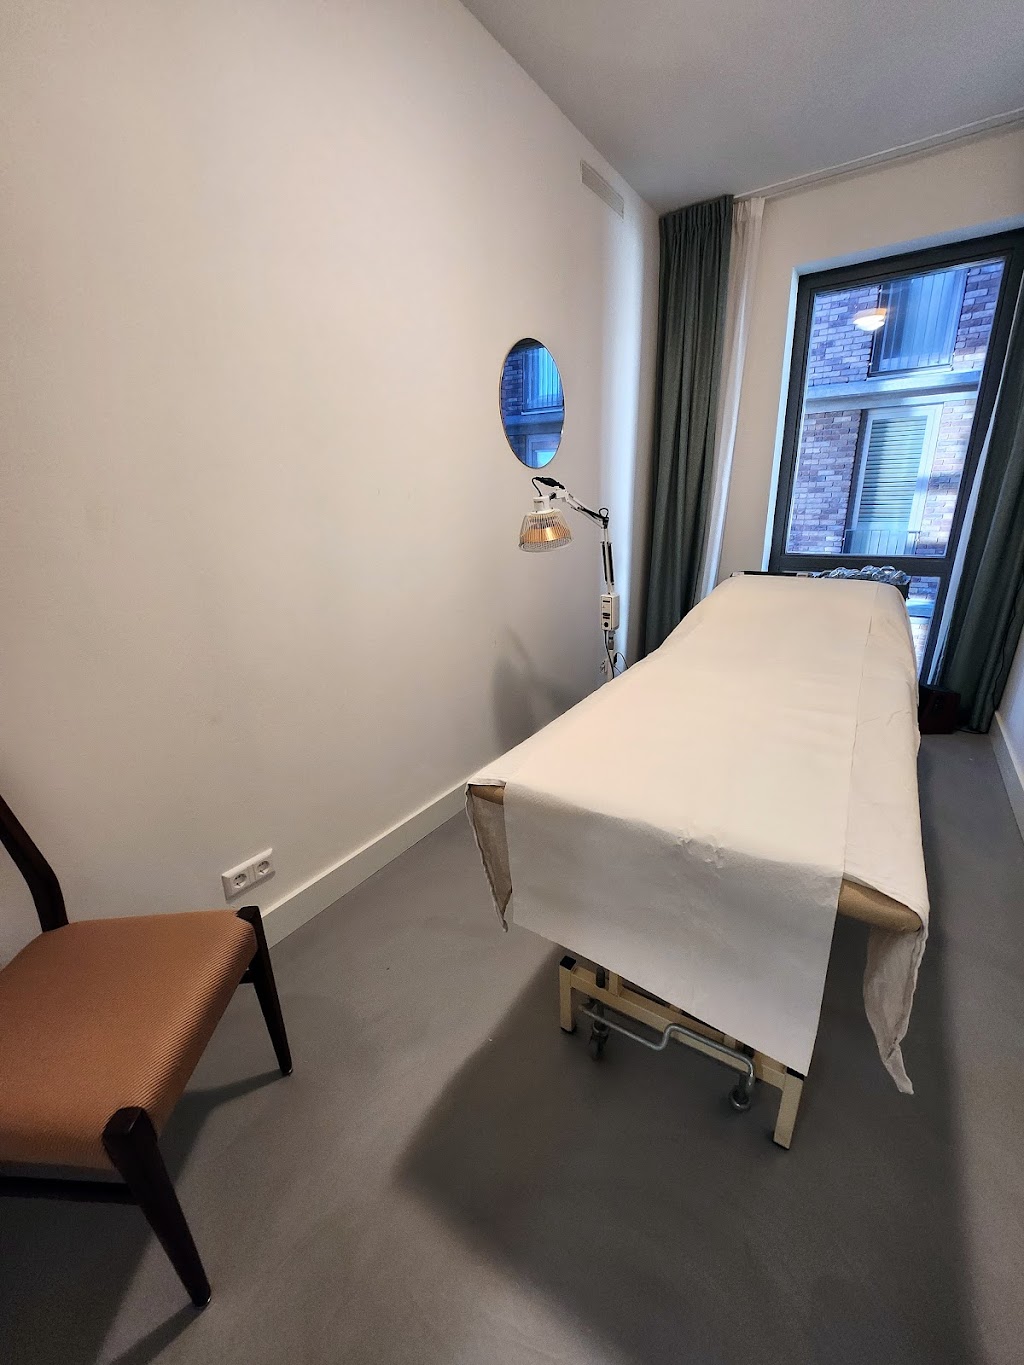 Acupuncture by Kim | Veembroederhof 187, 1019 HD Amsterdam, Netherlands | Phone: 06 15454562